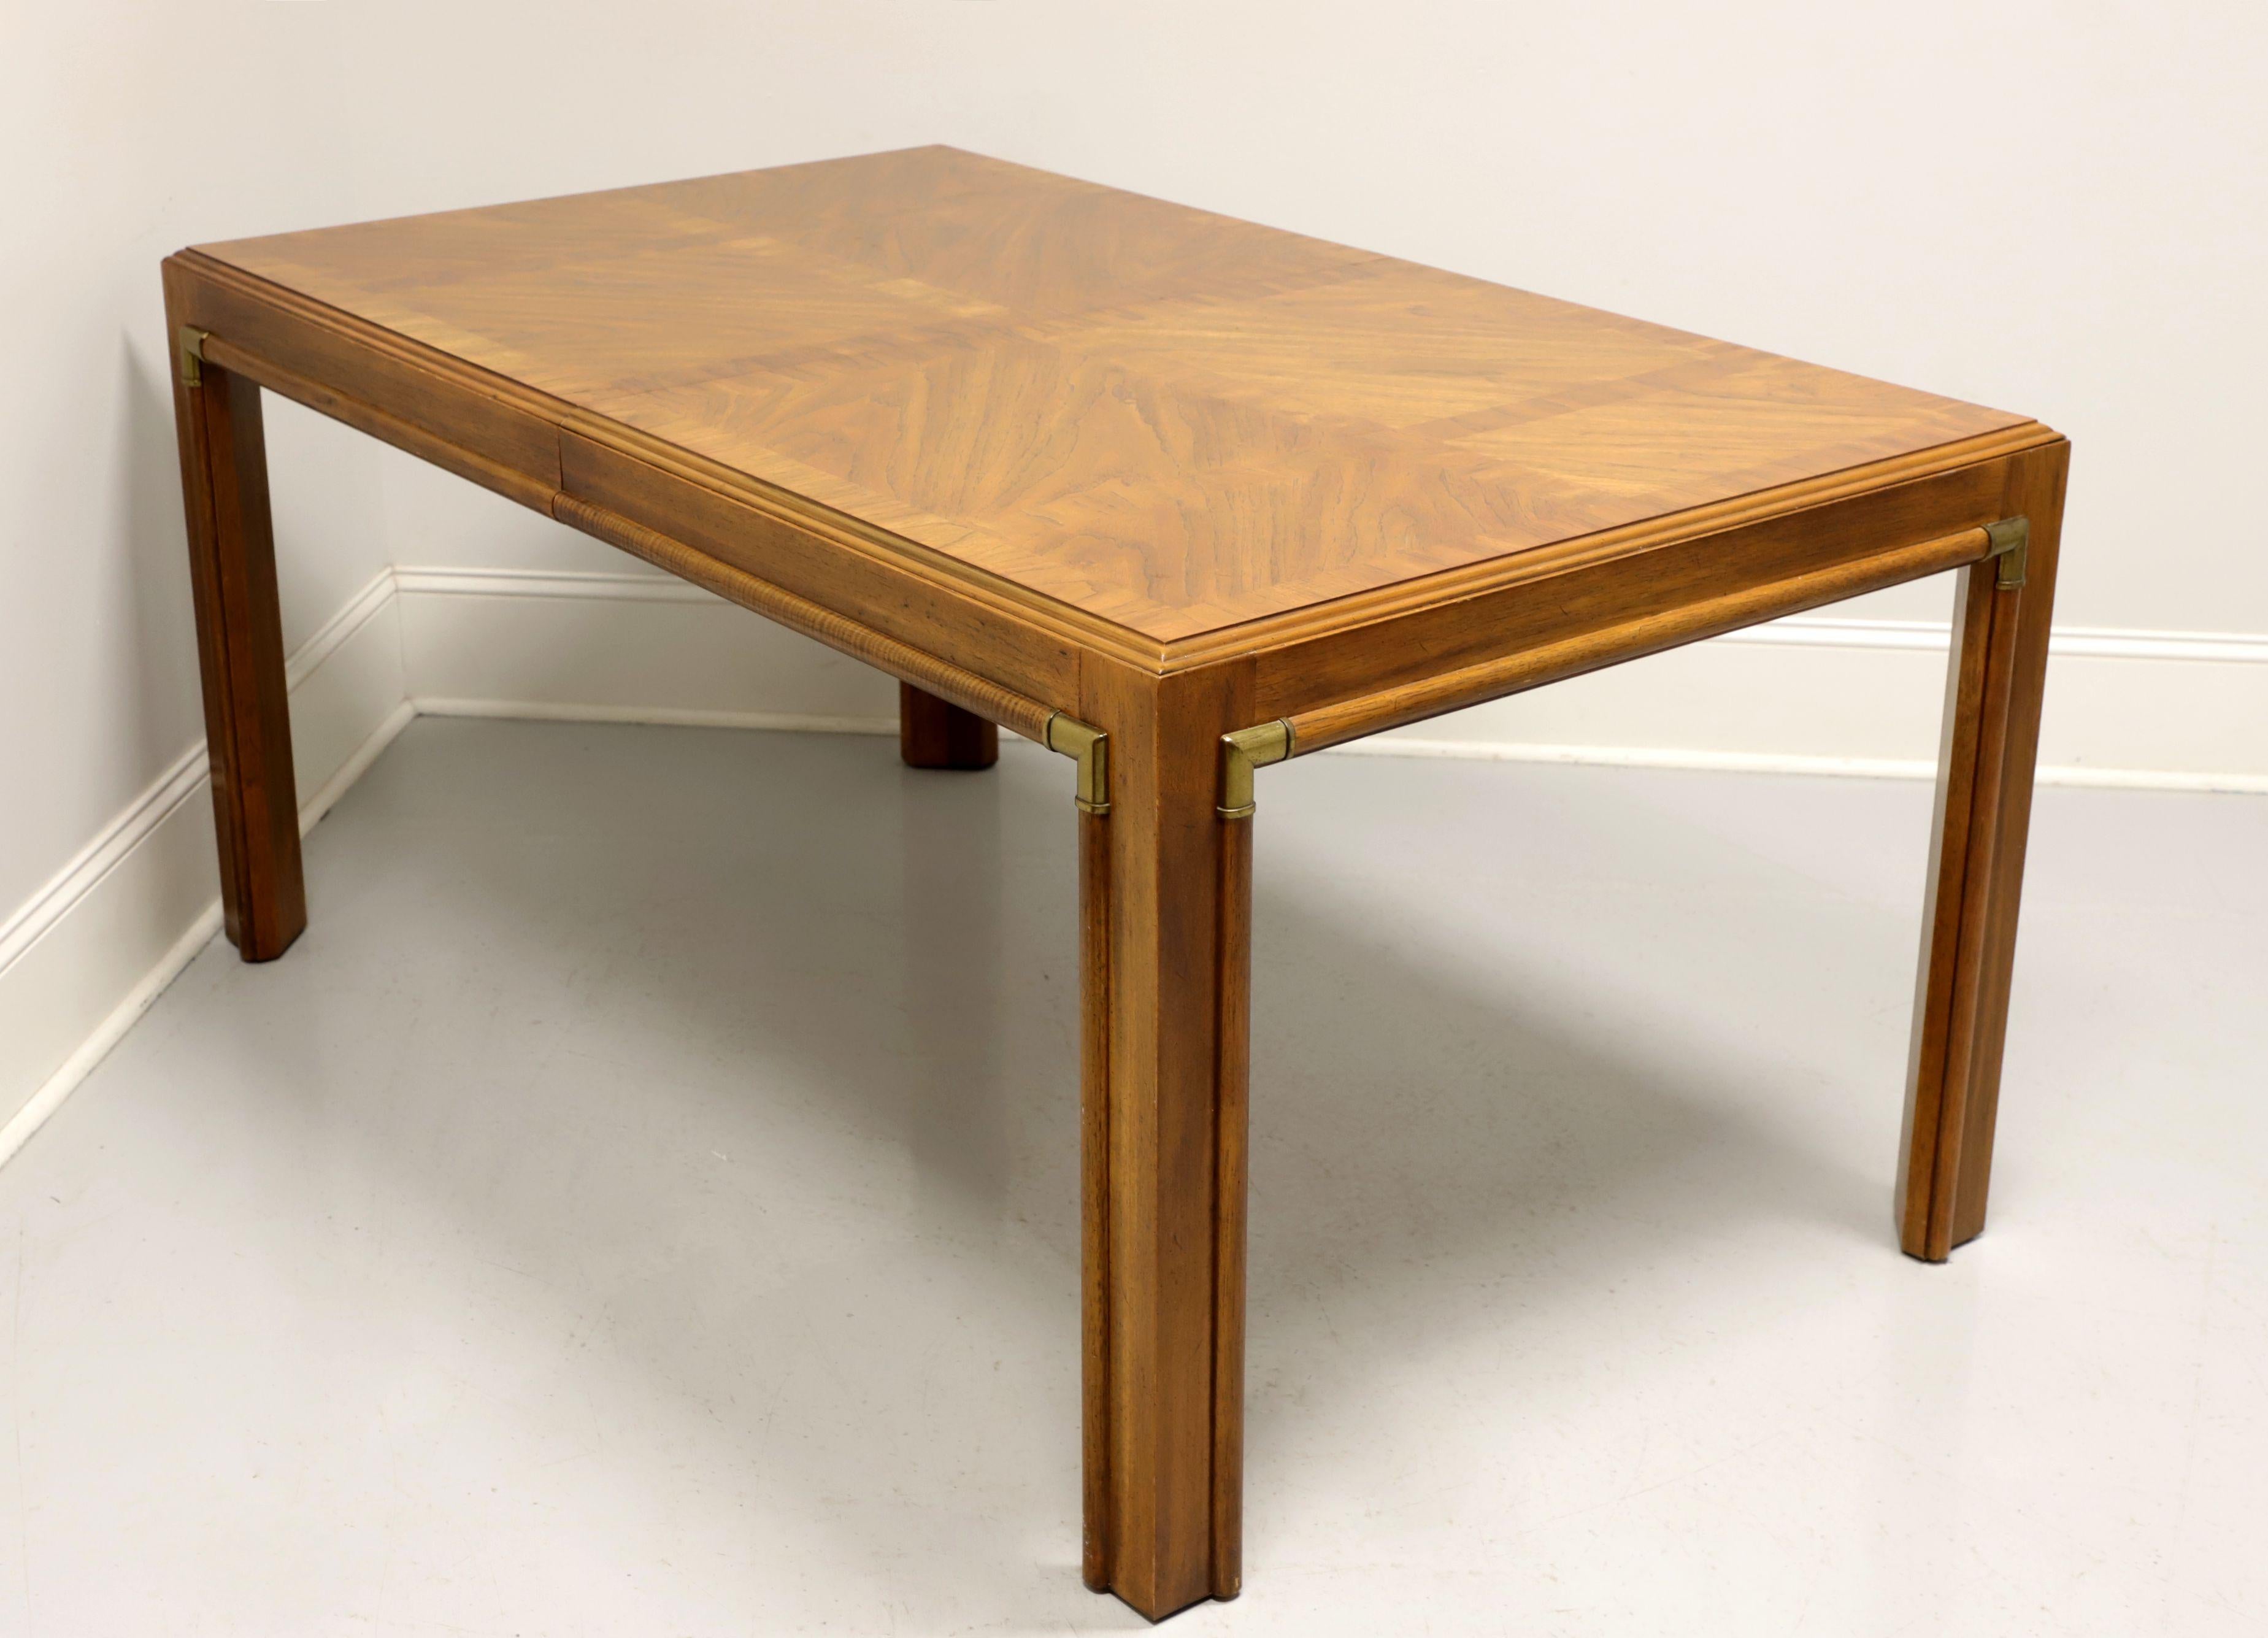 DREXEL Accolade Campaign Style Rectangular Dining Table 6